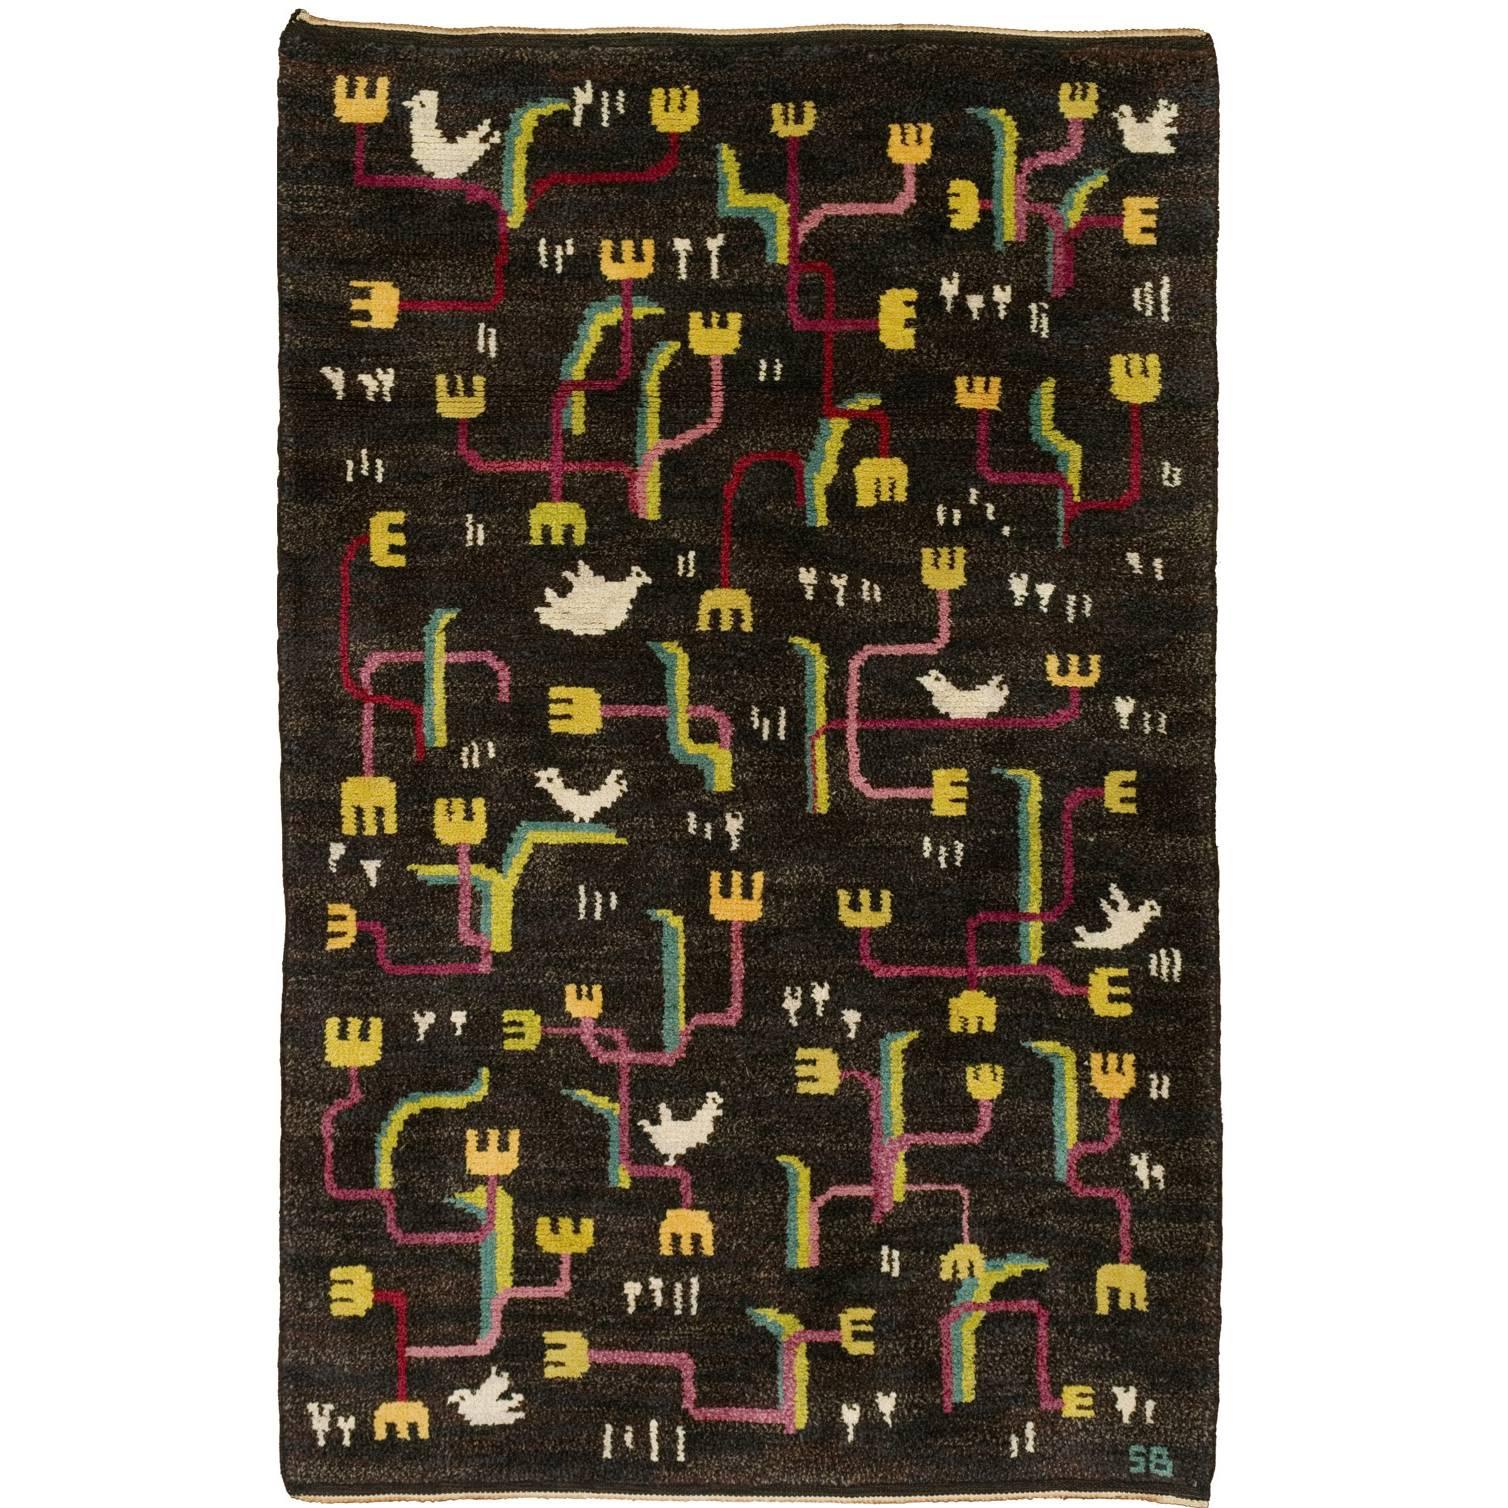 "Song of the Birds" Mid-20th Century Swedish Pile Rug by Sigvard Bernadotte For Sale